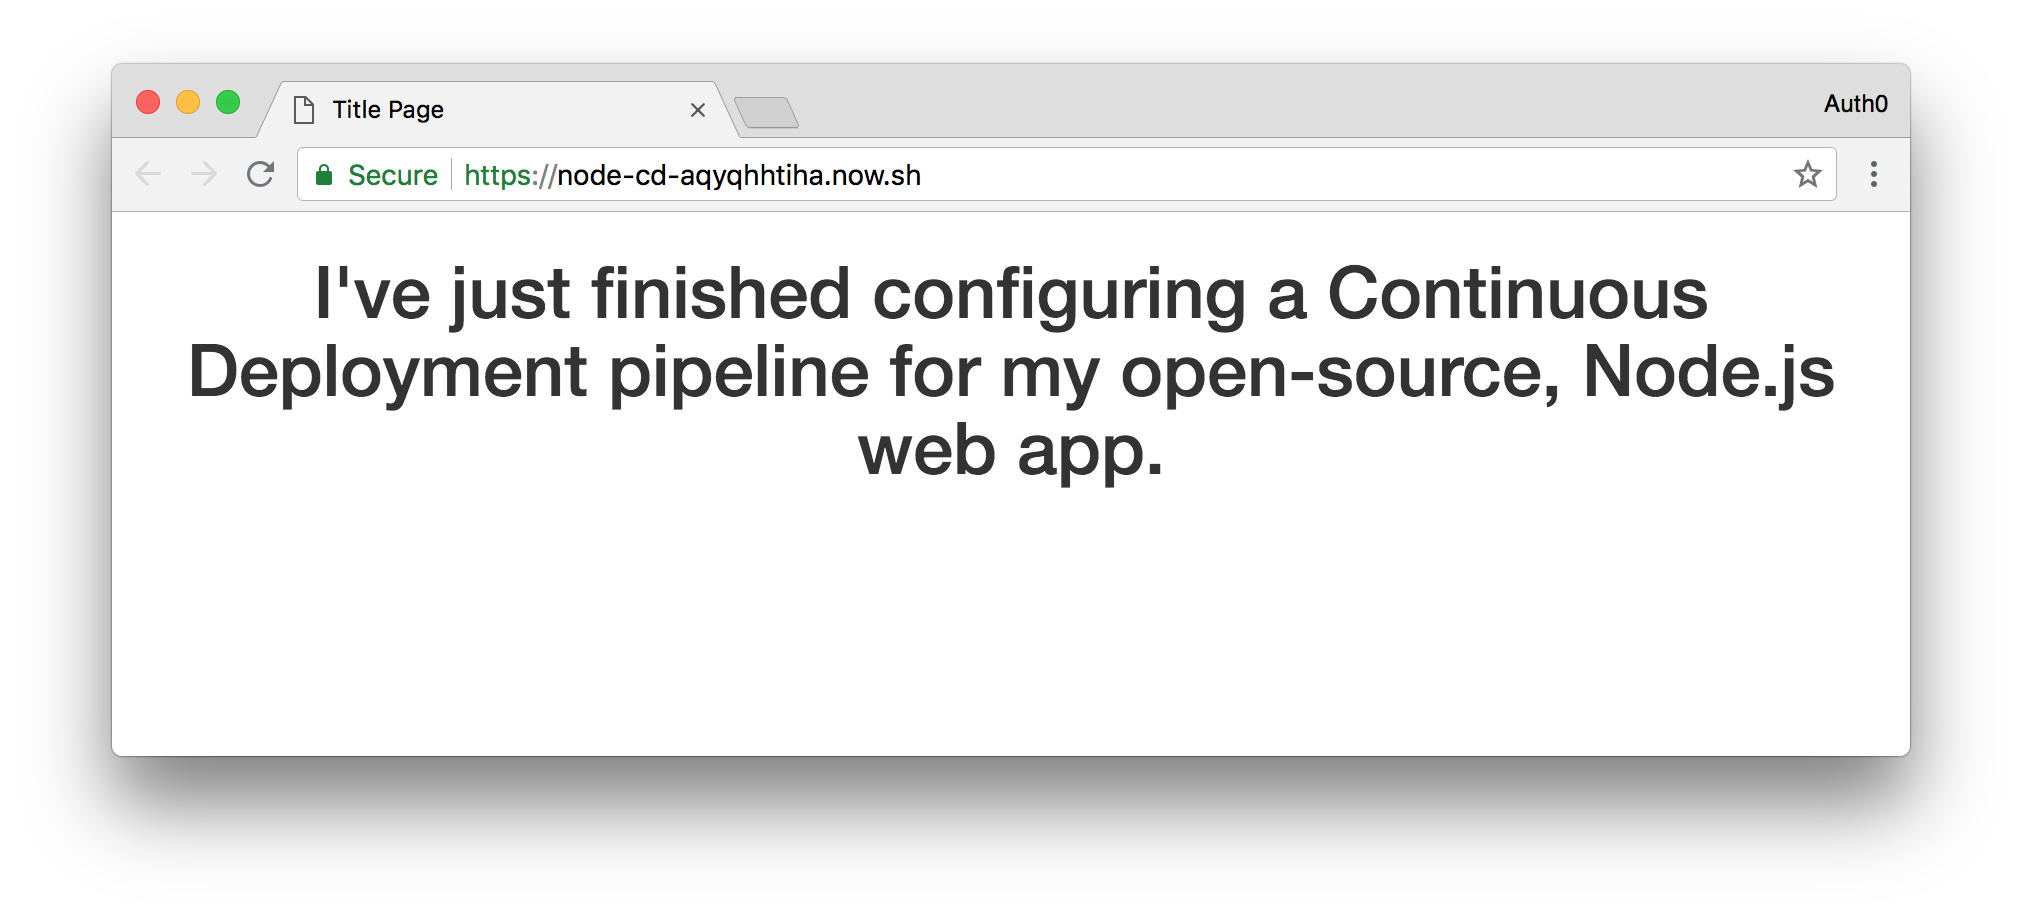 The second deployment of the open-source web app